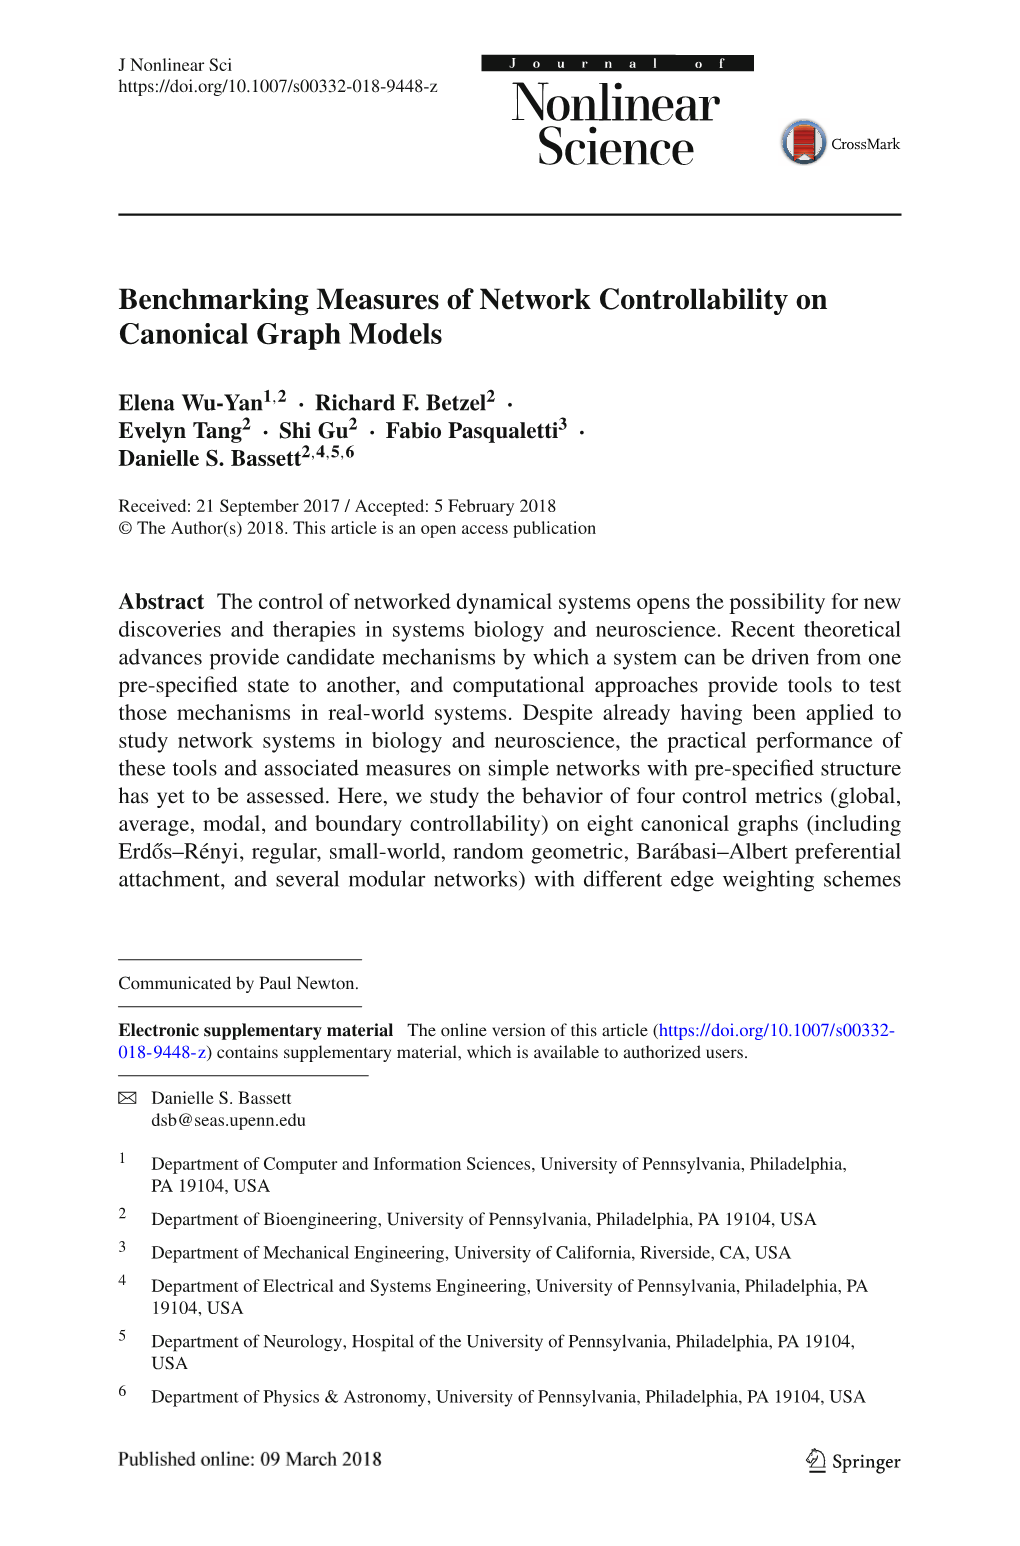 Benchmarking Measures of Network Controllability on Canonical Graph Models